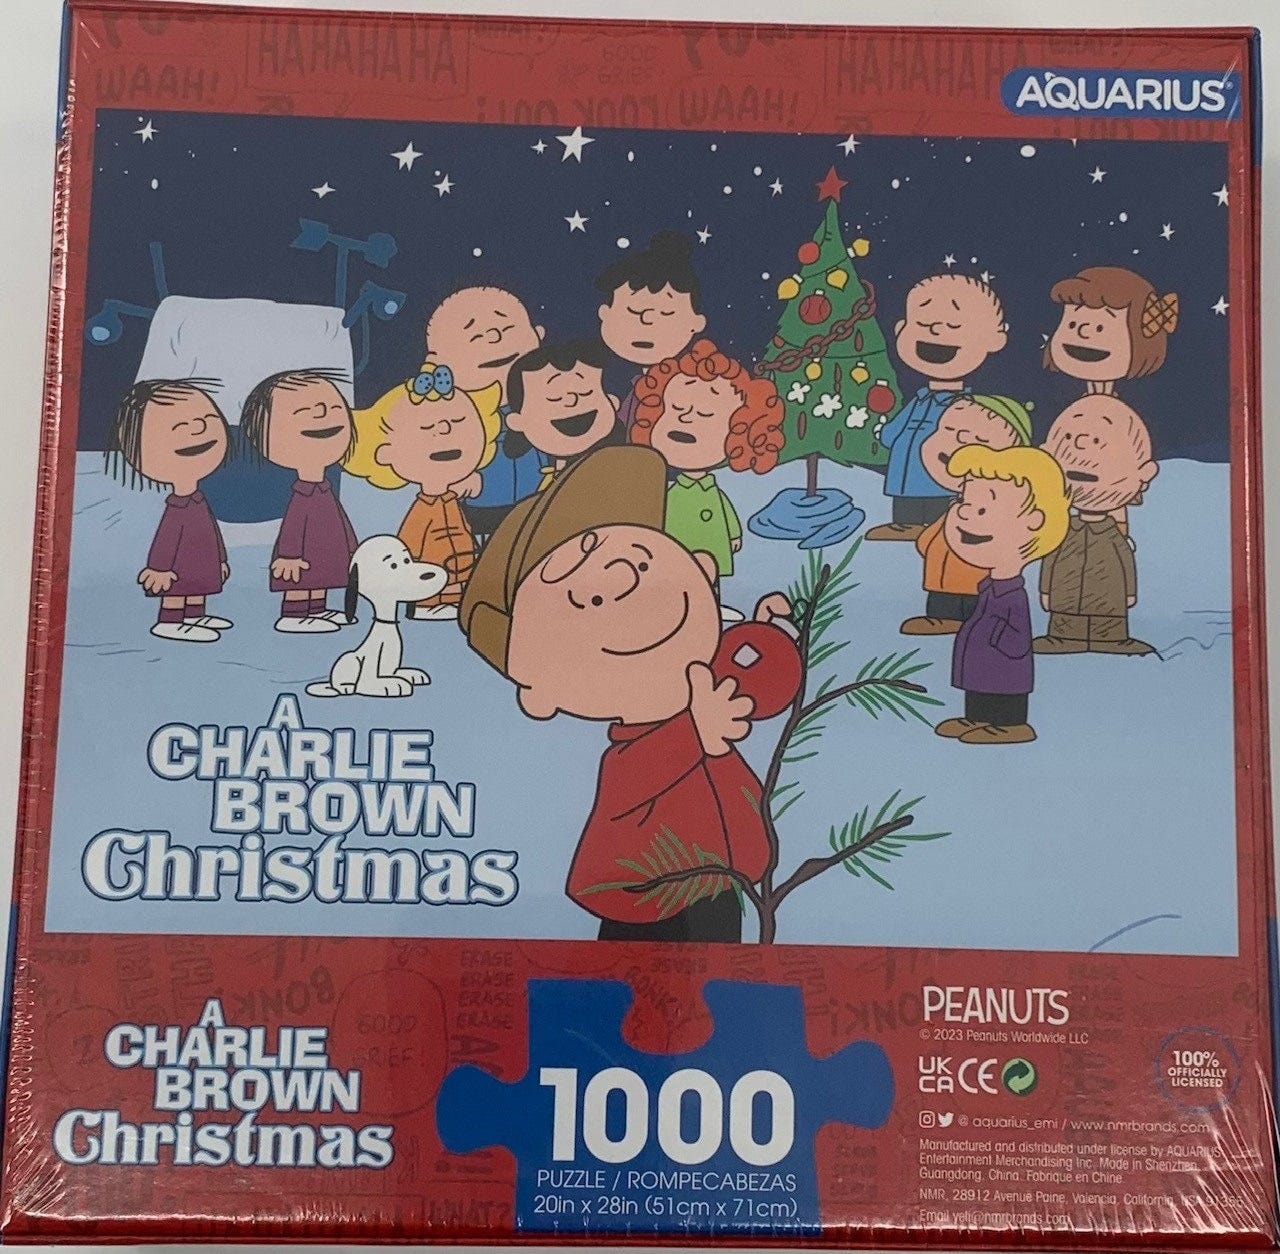 Peanuts - A Charlie Brown Christmas 1000 Piece Puzzle